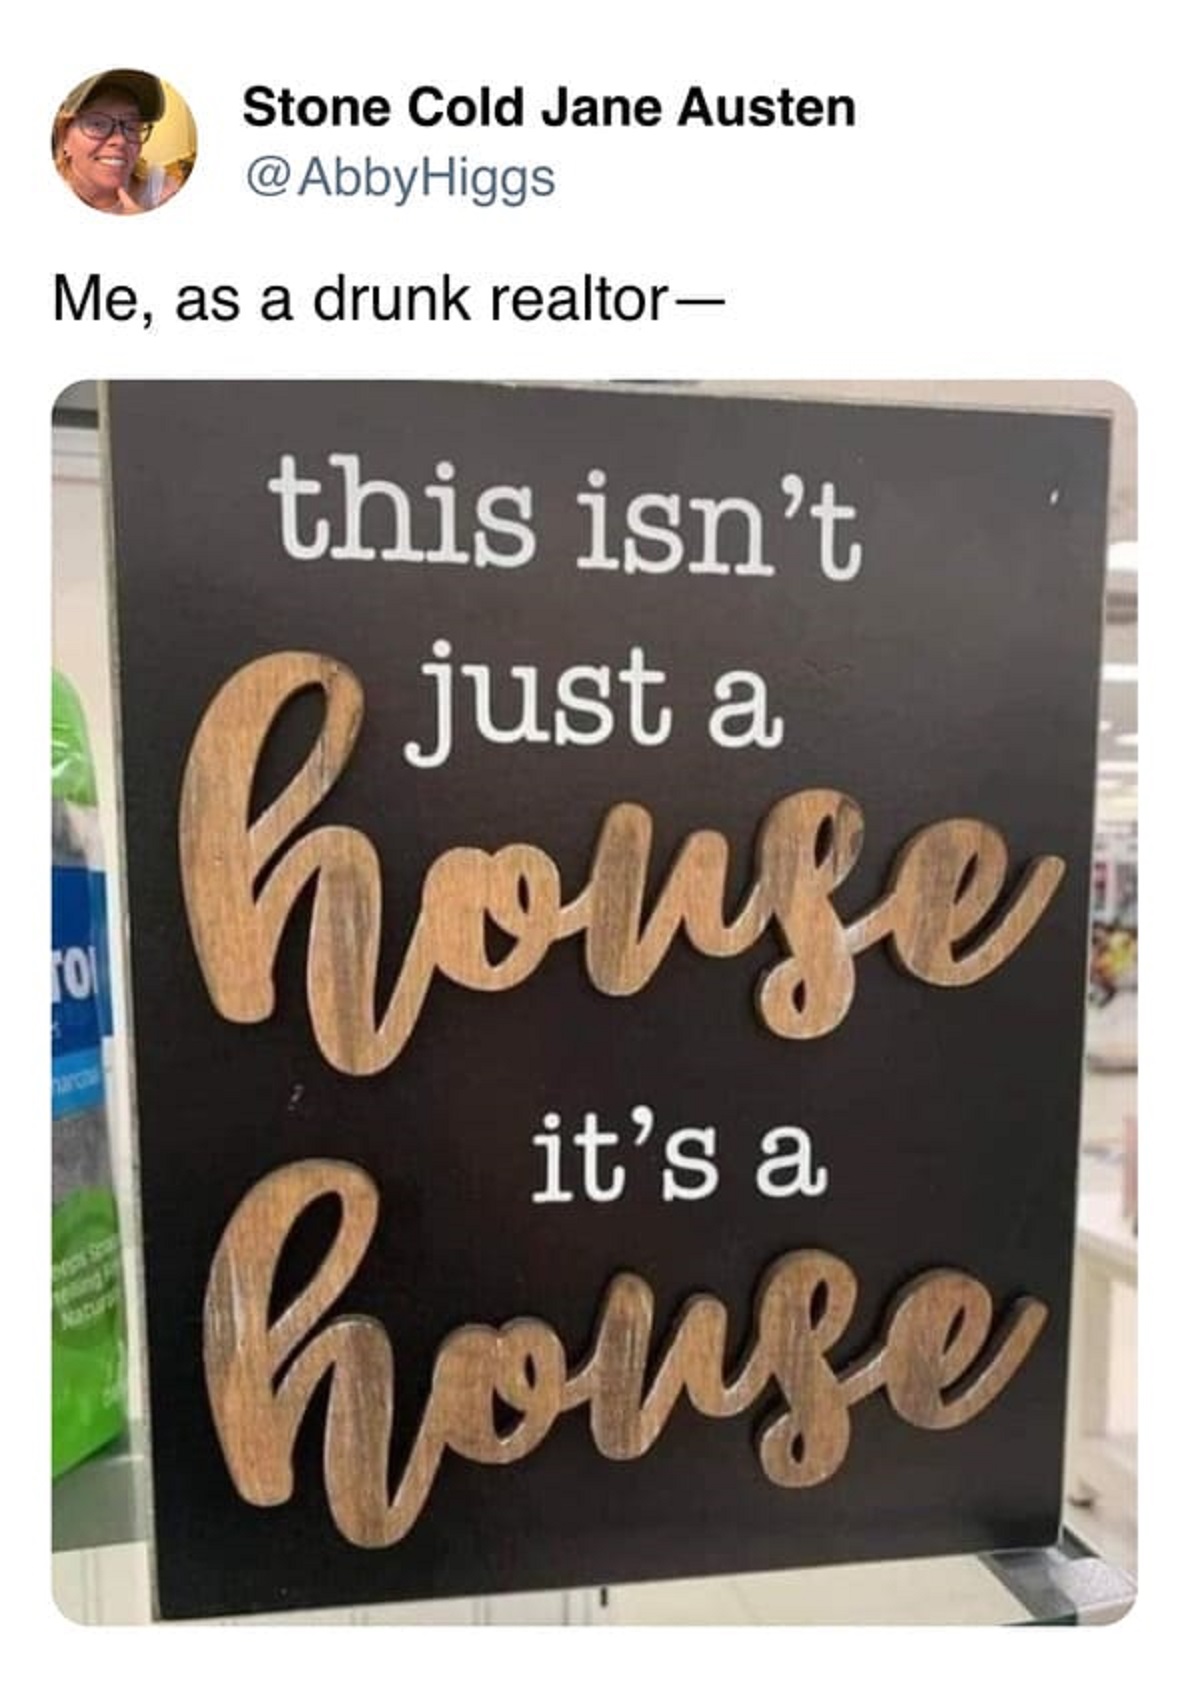 funny memes twitter random memes - Stone Cold Jane Austen Me, as a drunk realtor fol this isn't house house it's a